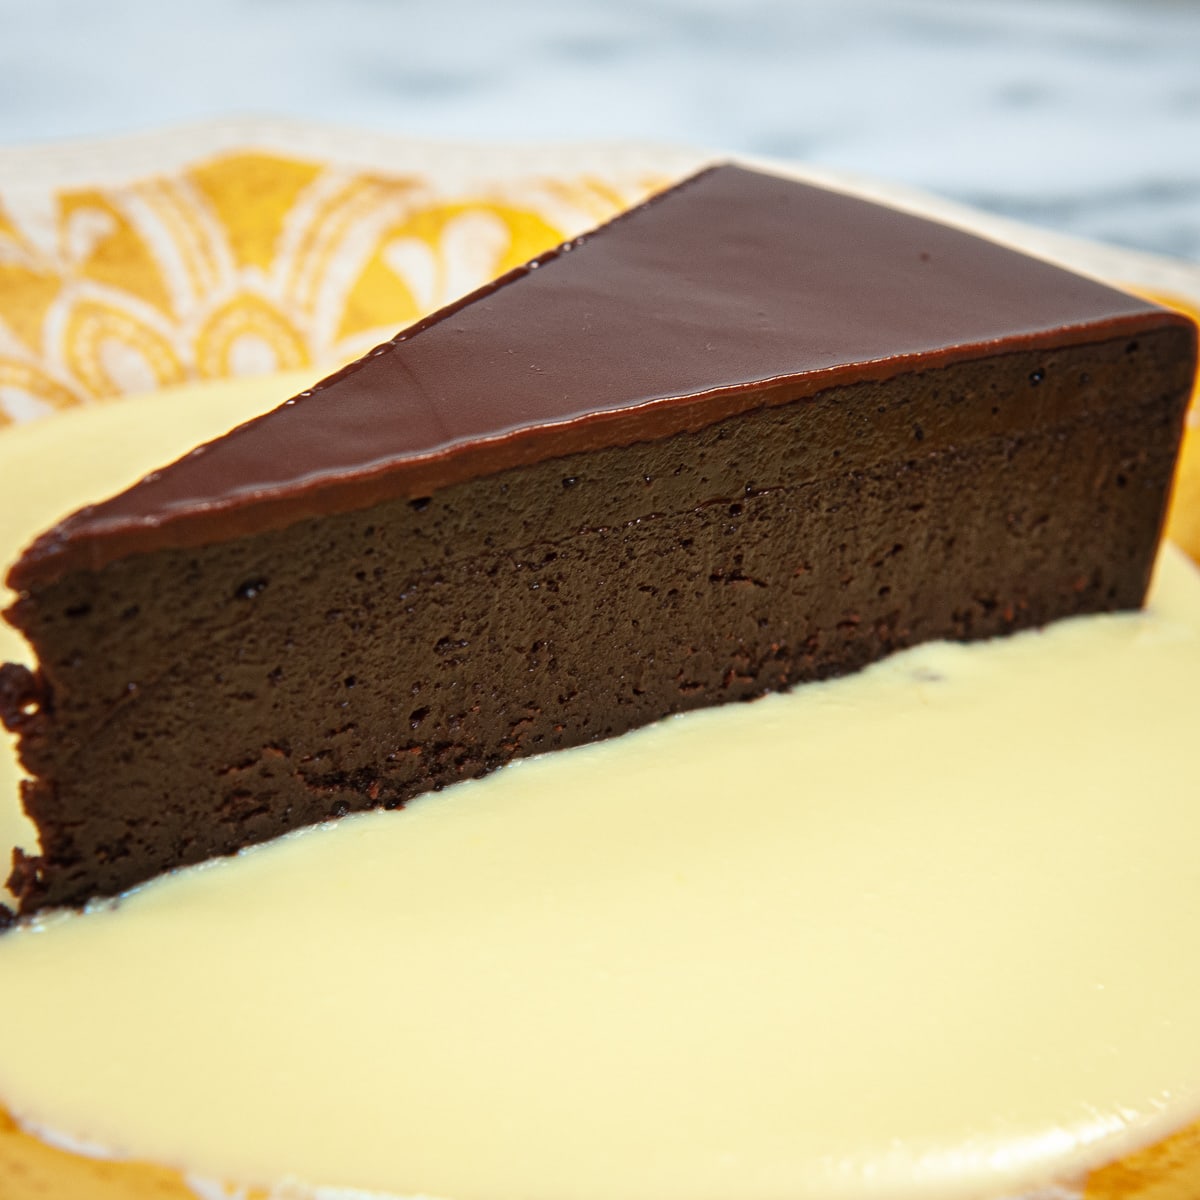 This  Ultimate Chocolate Fudge cake is gluten free and easy to make.  It is finished with a chocolate glaze and served with a Vanilla Creme Anglaise